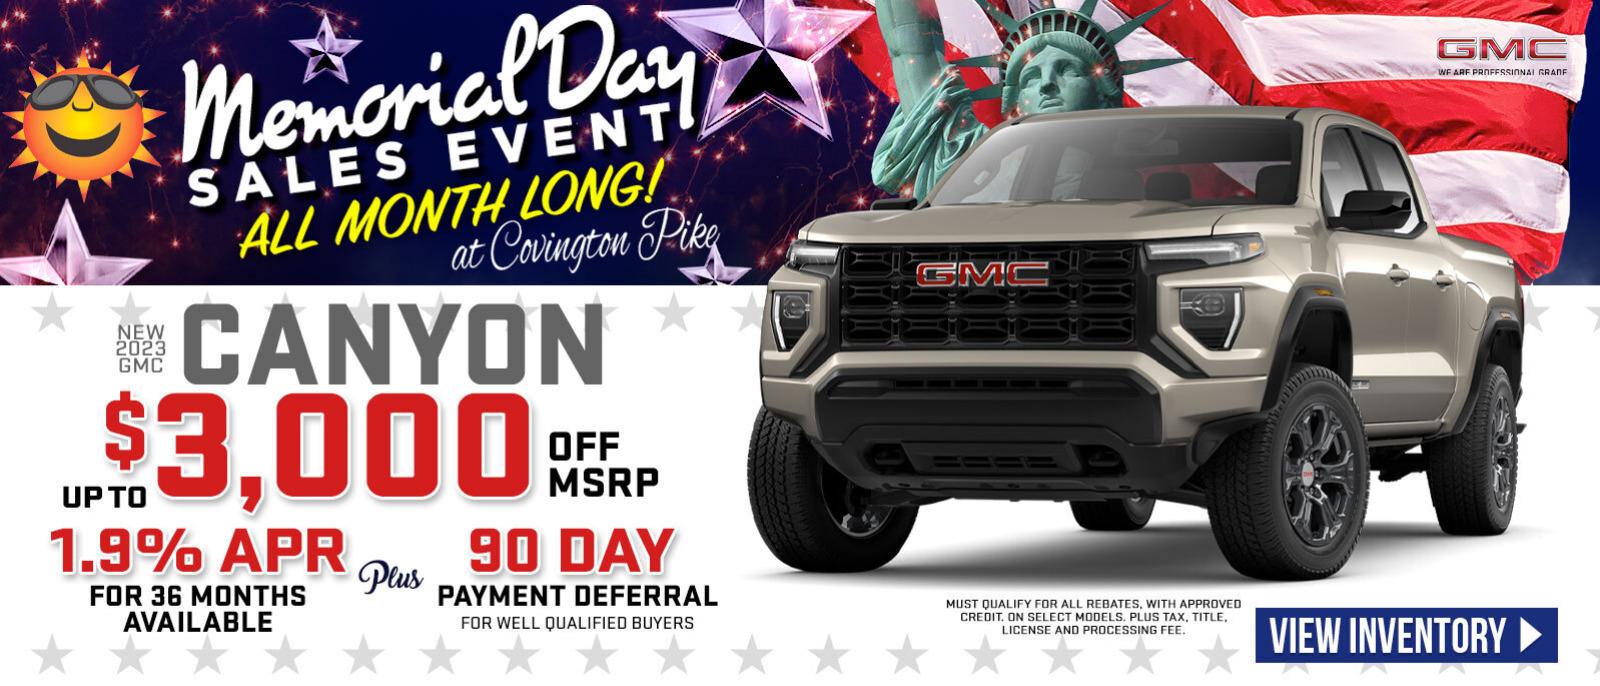 New 2023 GMC Canyon - Up to 3000 Off MSRP